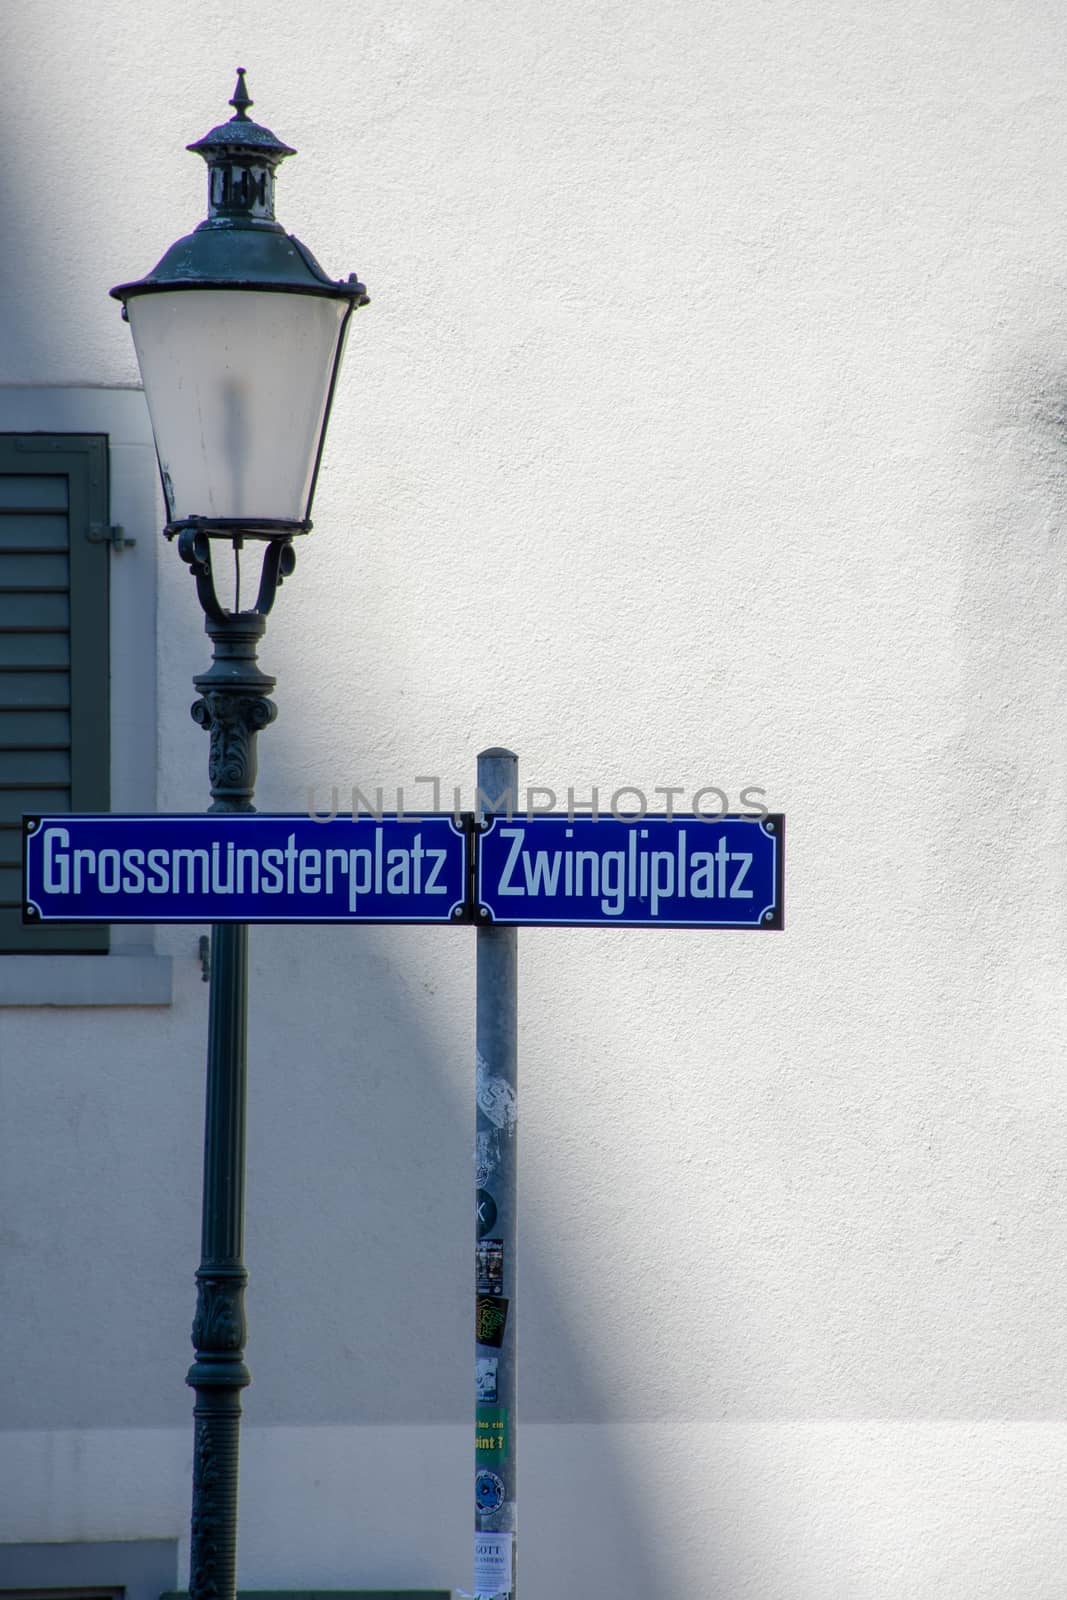 Zwingli and Grossmunster Street sign by kingmaphotos